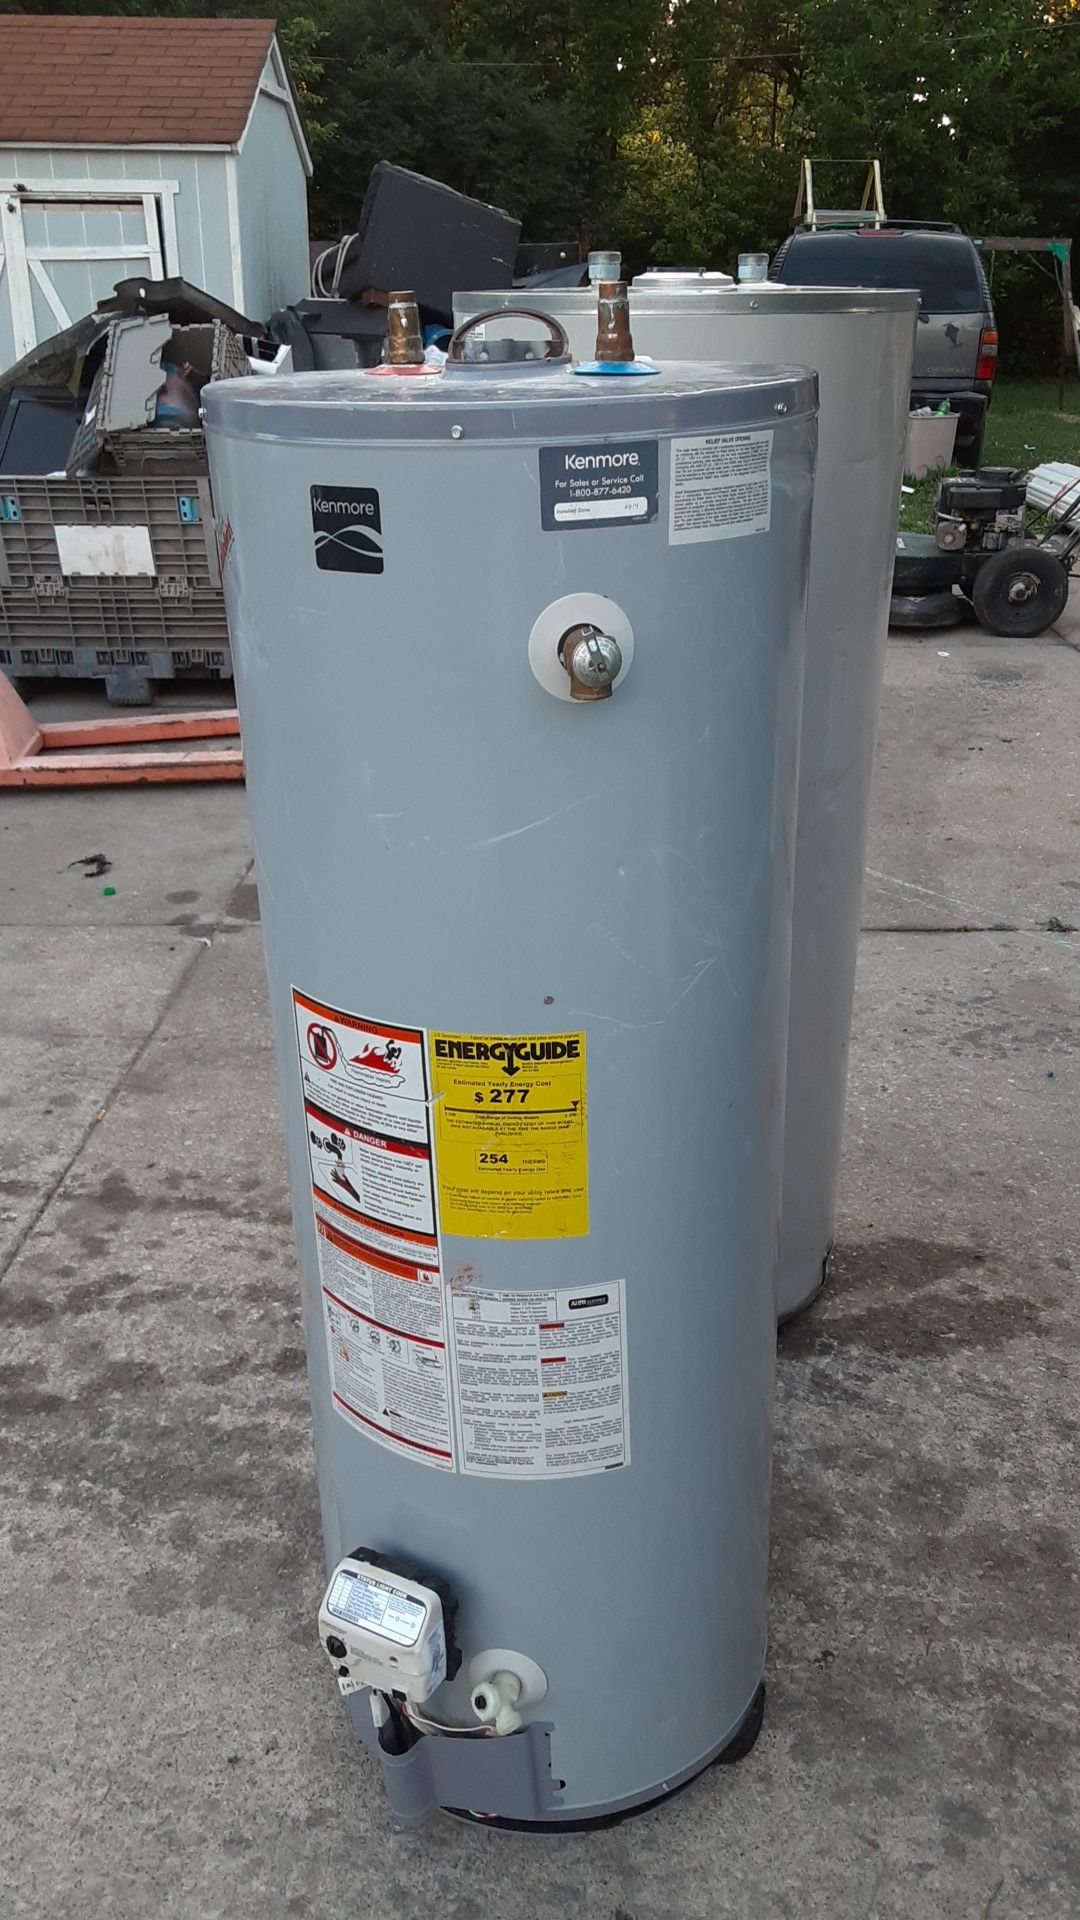 Kenmore gas water heater 50 gallon works great as is